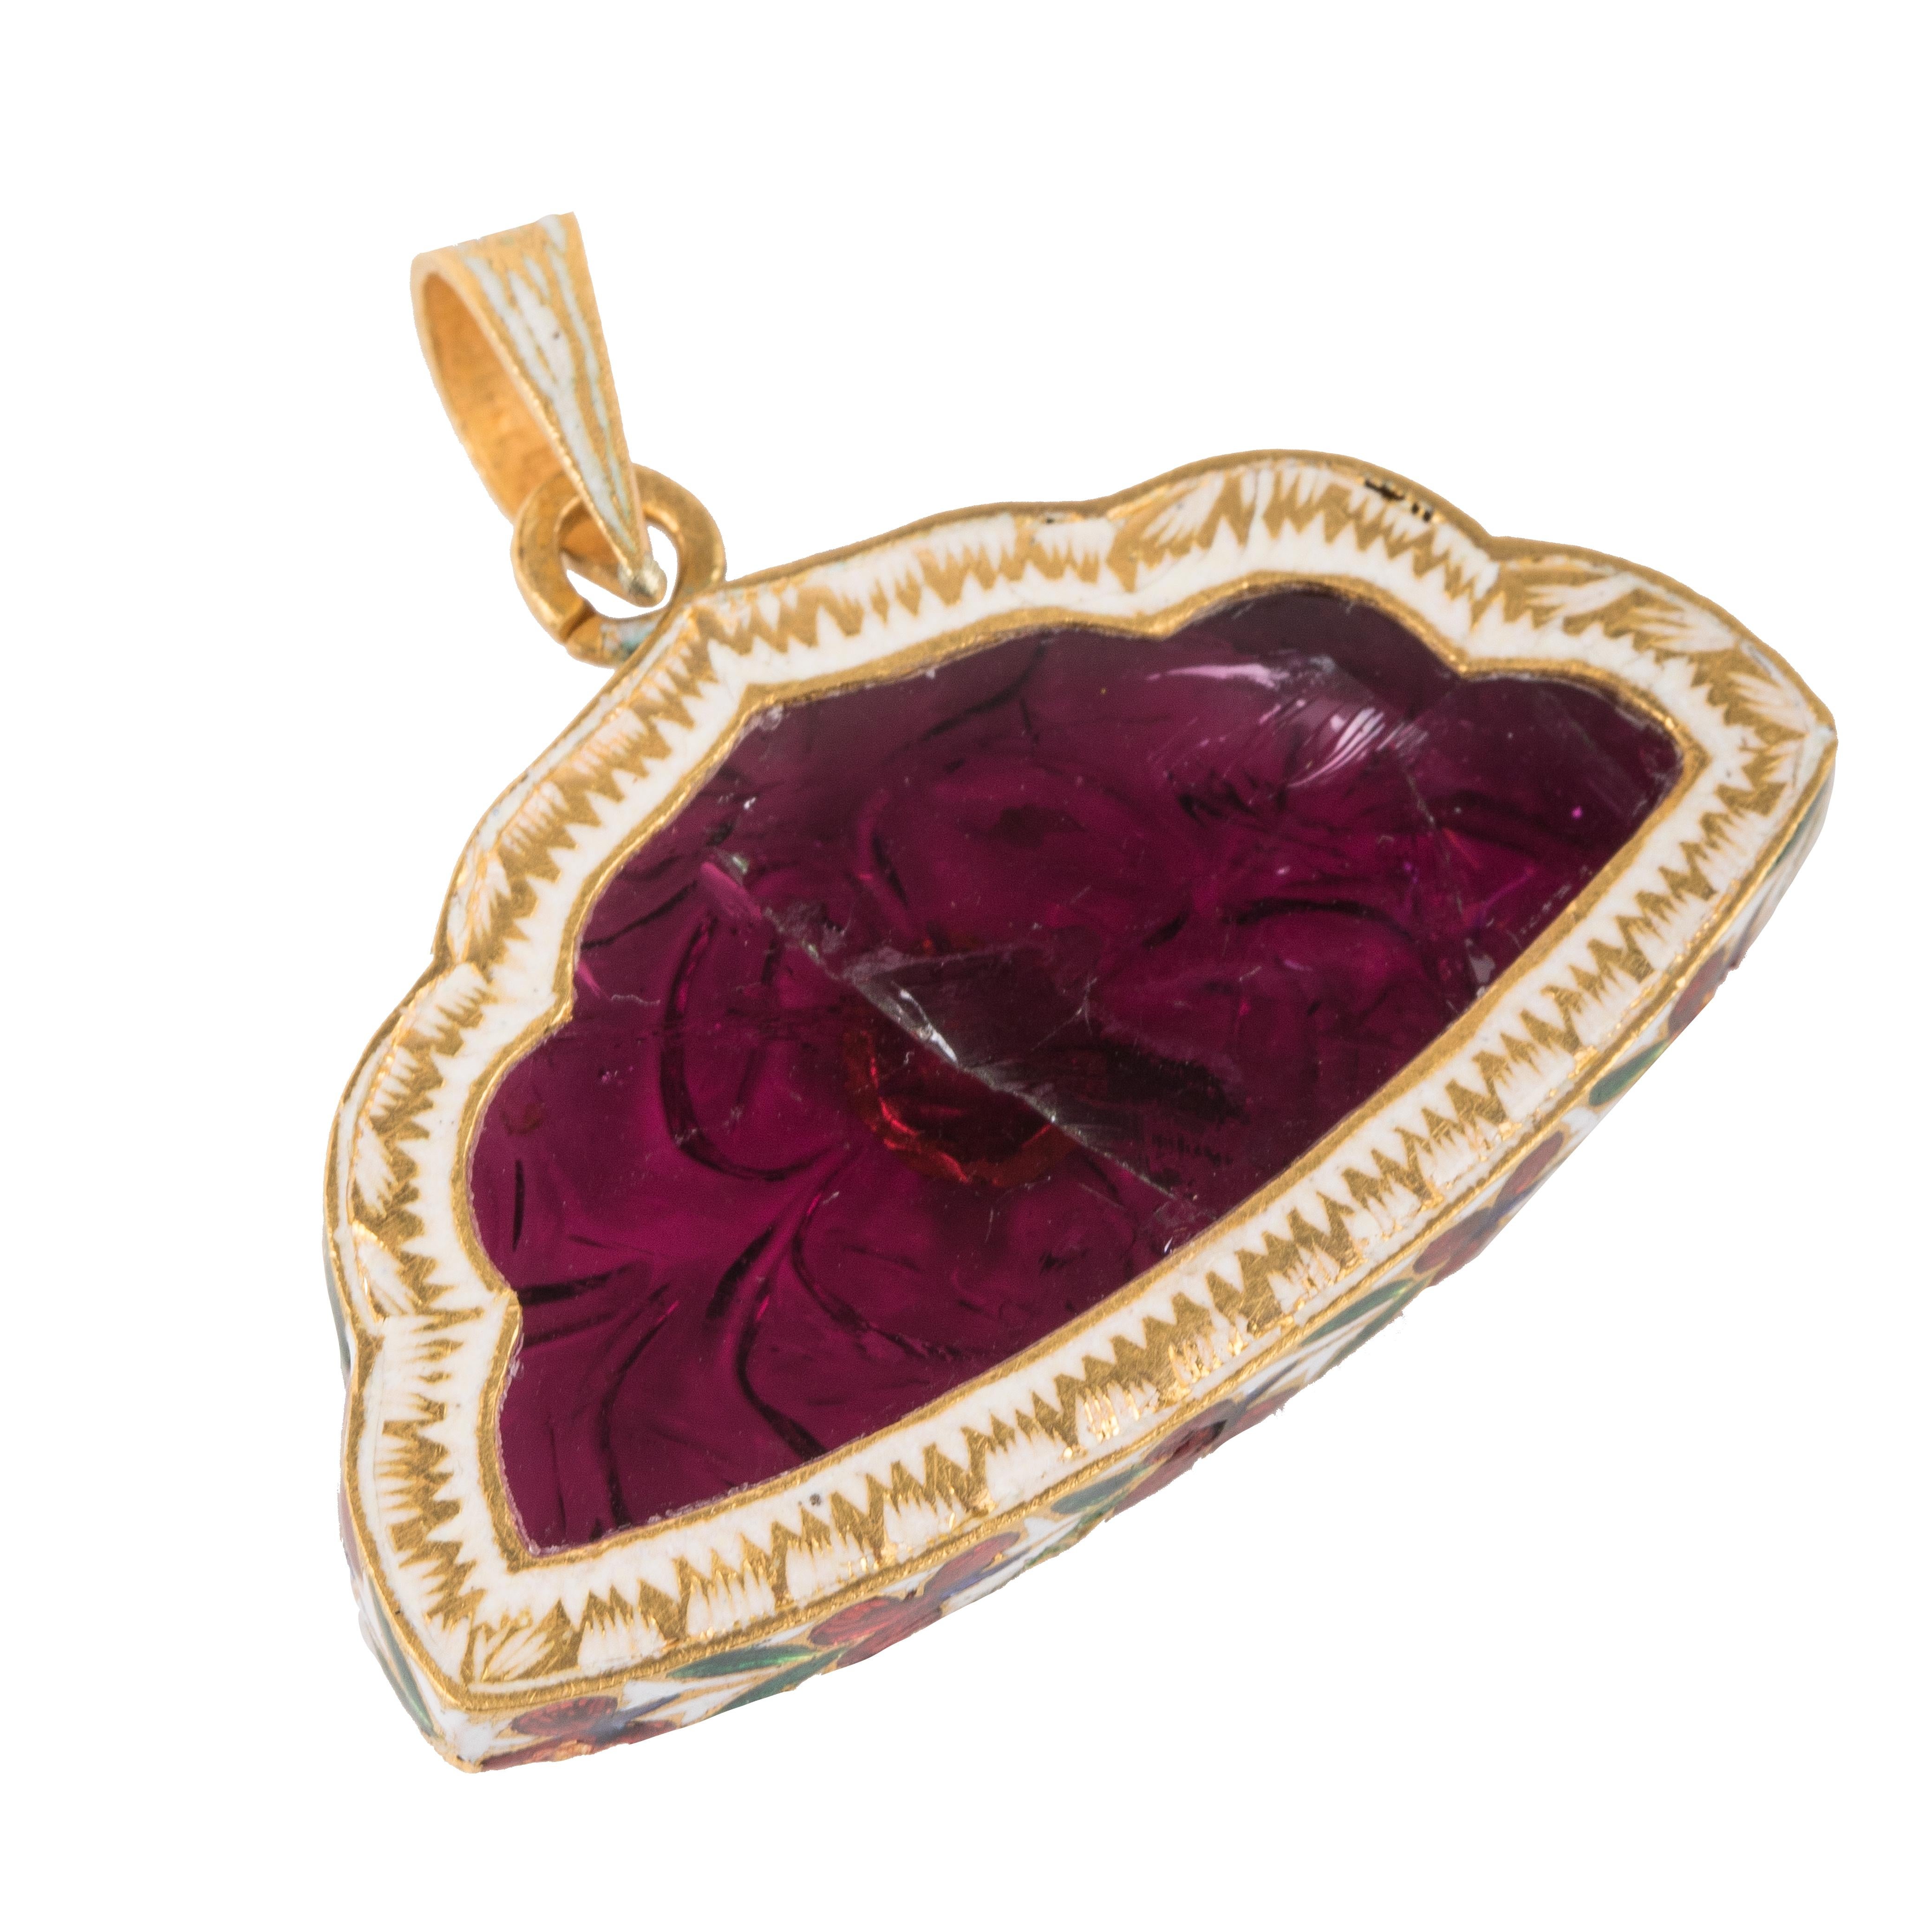 This pendant features a 40-carat Rubellite stone that has been hand-carved with flower carving. There is an uncut diamond on the front. This stone originates from Brazil and the pendant has 22carat gold enameling on the sides. 